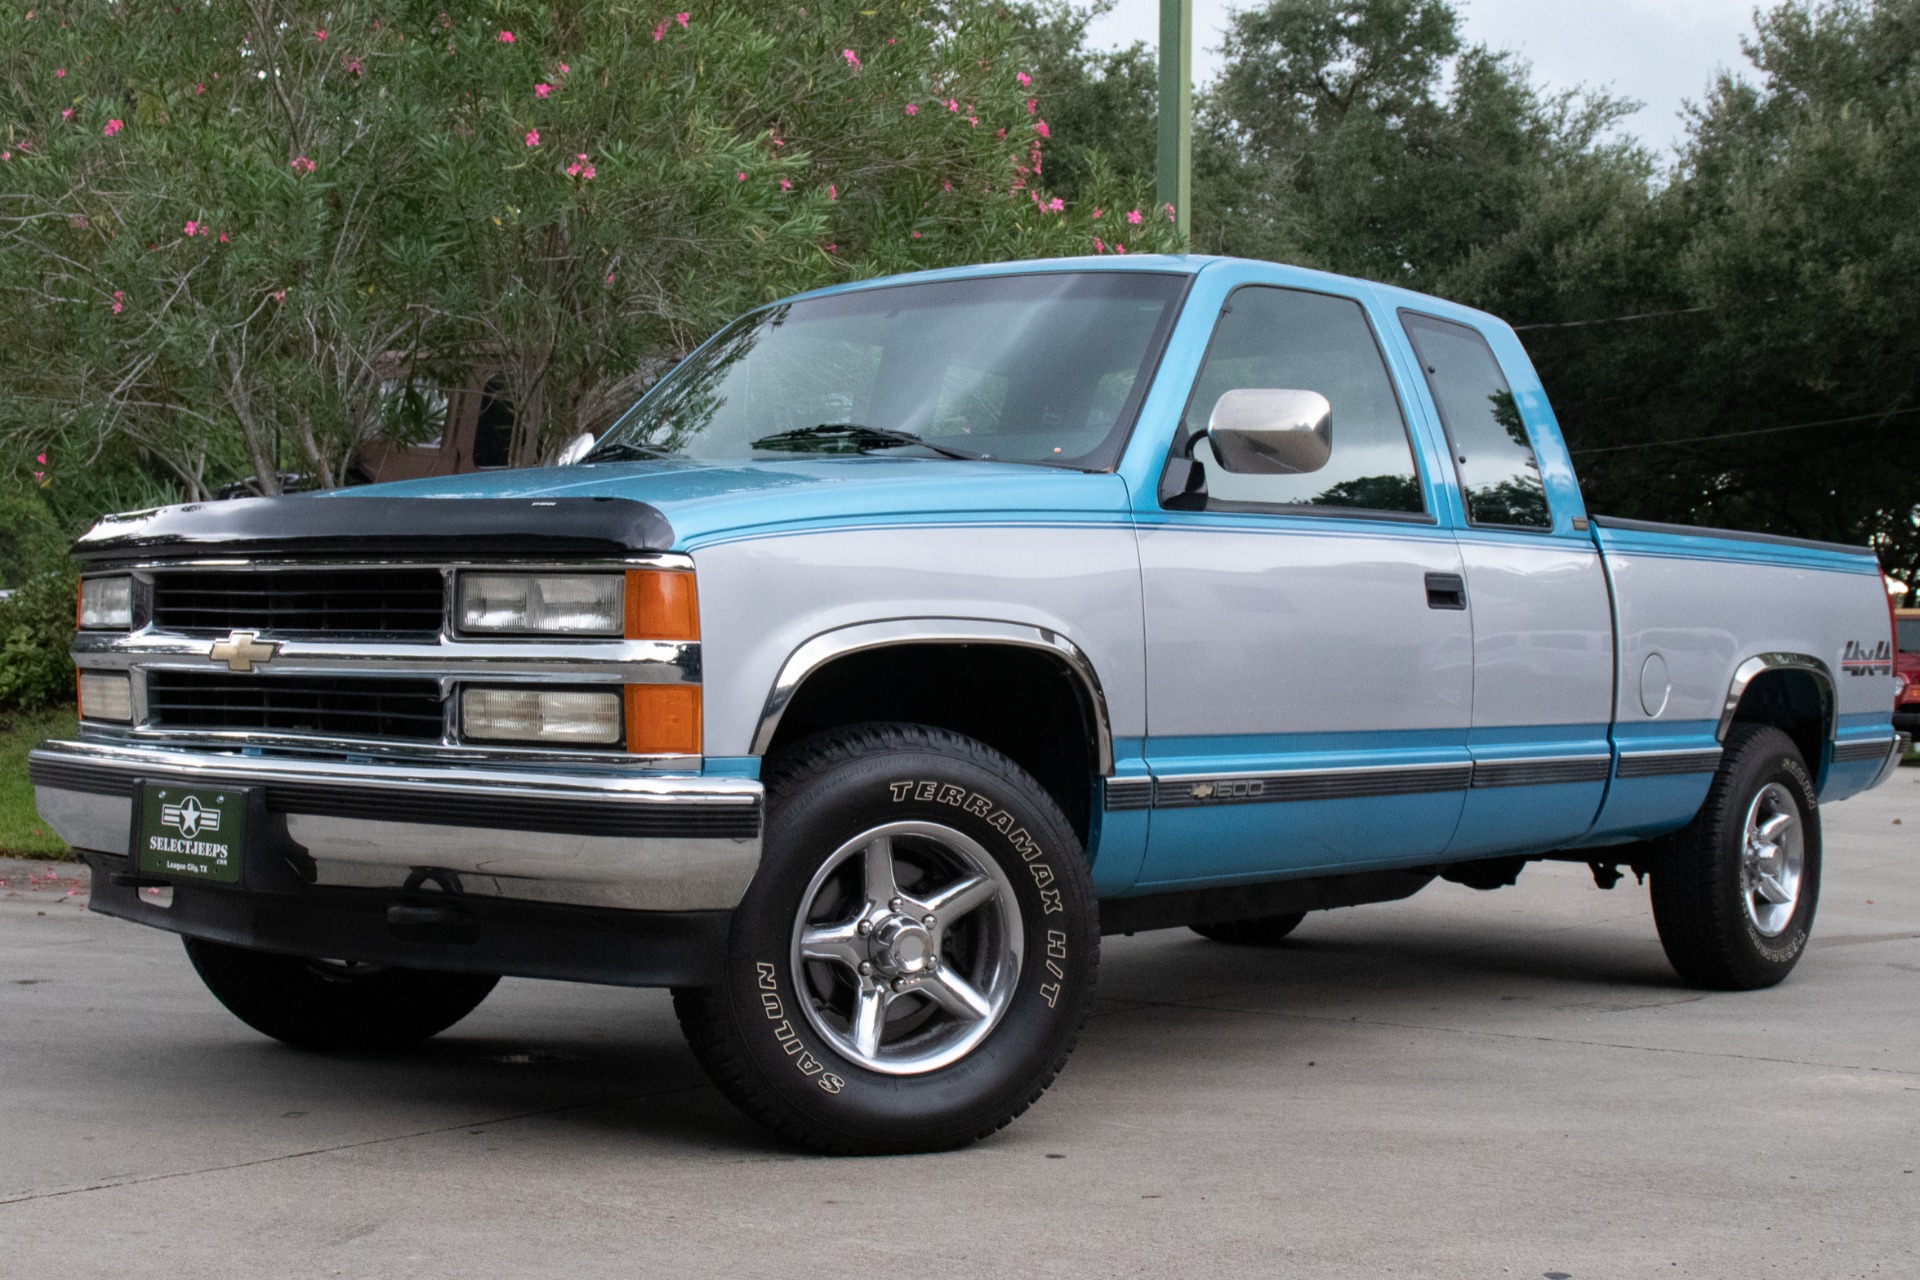 Used 1994 Chevrolet C K 1500 Series K1500 Cheyenne For Sale 15 995 Select Jeeps Inc Stock